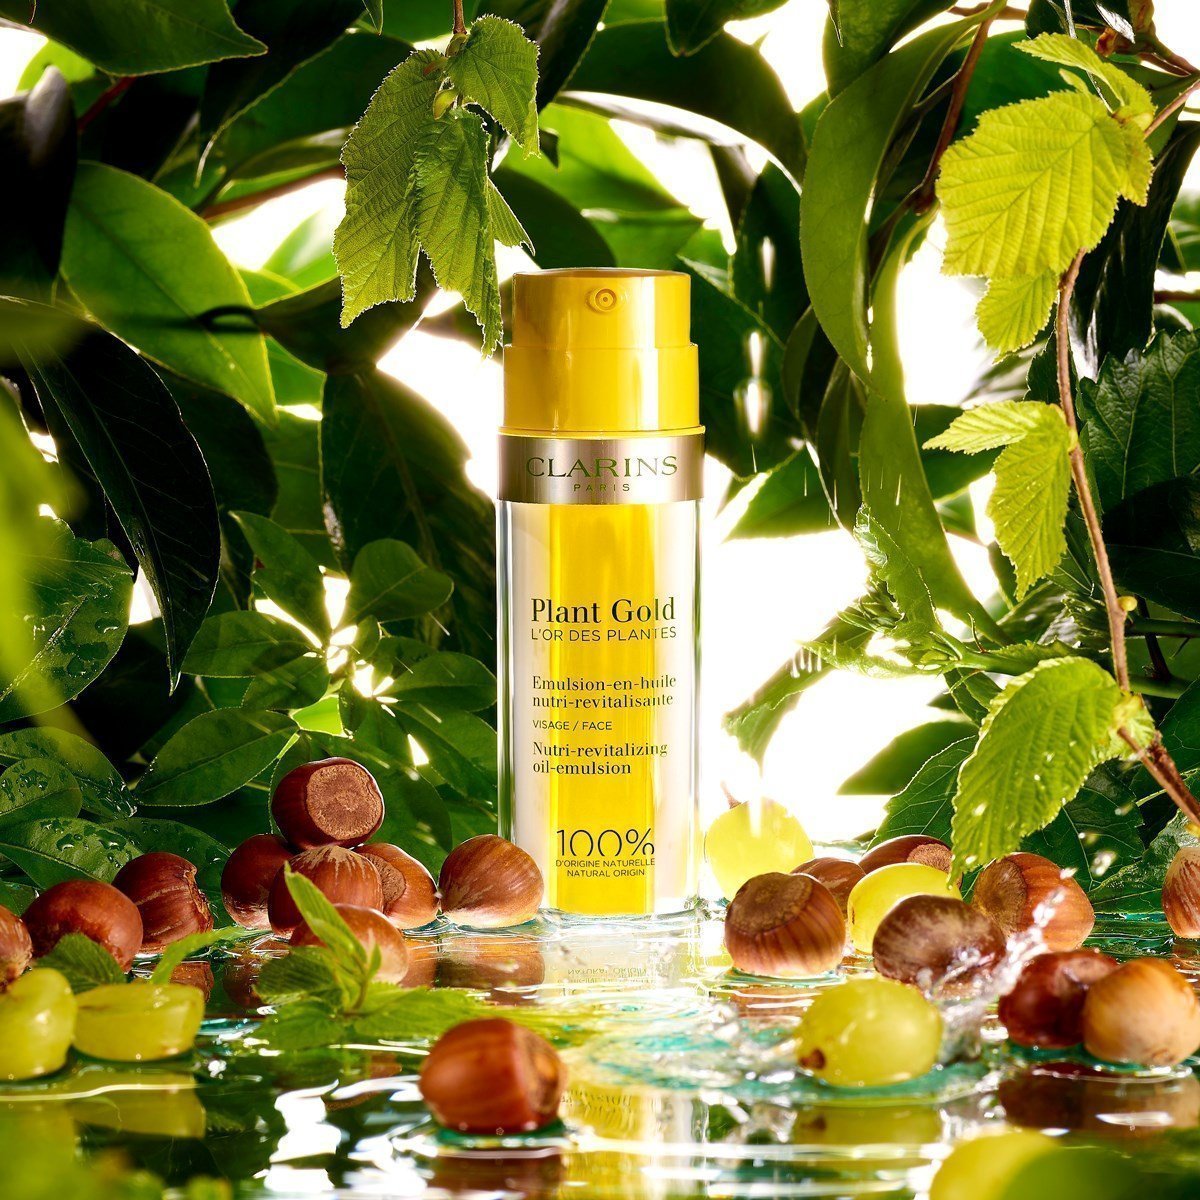 Clarins plant gold